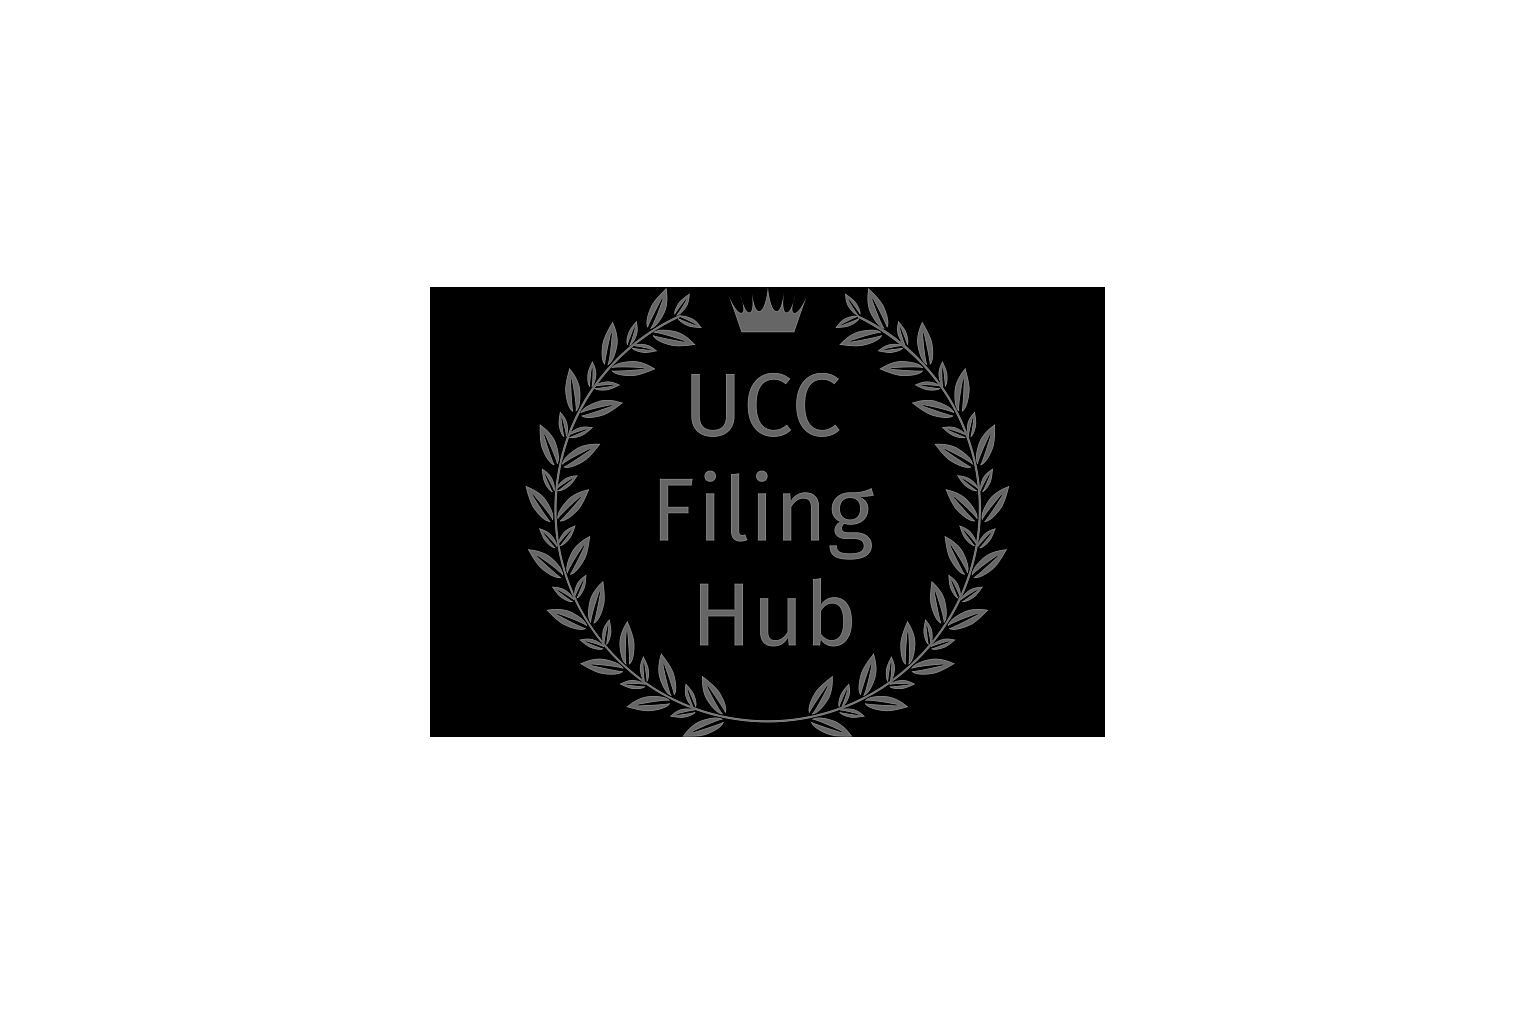 CT Corporation's UCC Filing Hub recognized by The National Law Journal